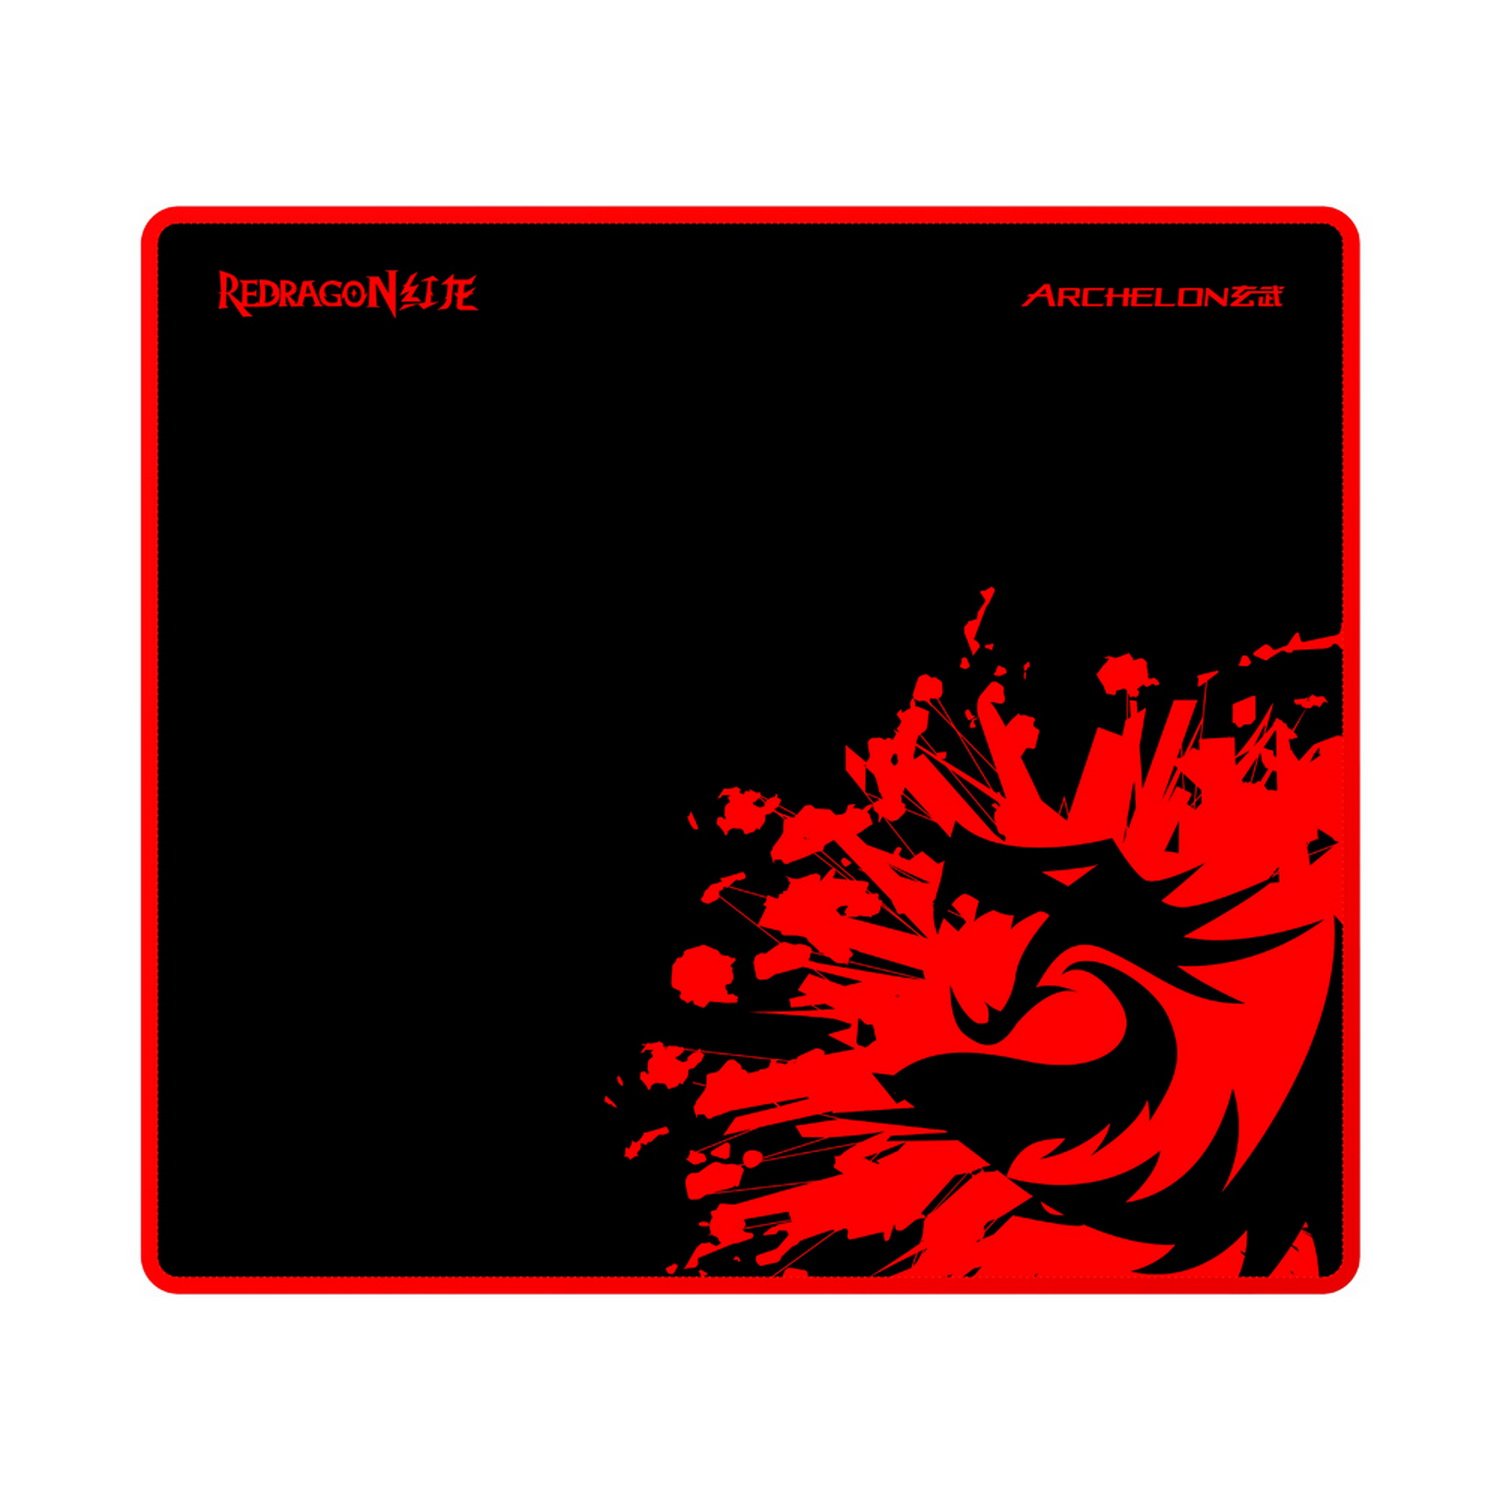 Book Cover Redragon P001 ARCHELON Gaming Mouse Pad, Stitched Edges, Waterproof, Ultra Thick Silky Smooth 12.99 x 10.24 x 0.2 inches (Large-Size) (12.99 x 10.24 x 0.2 inches Large-Size) Red & Black